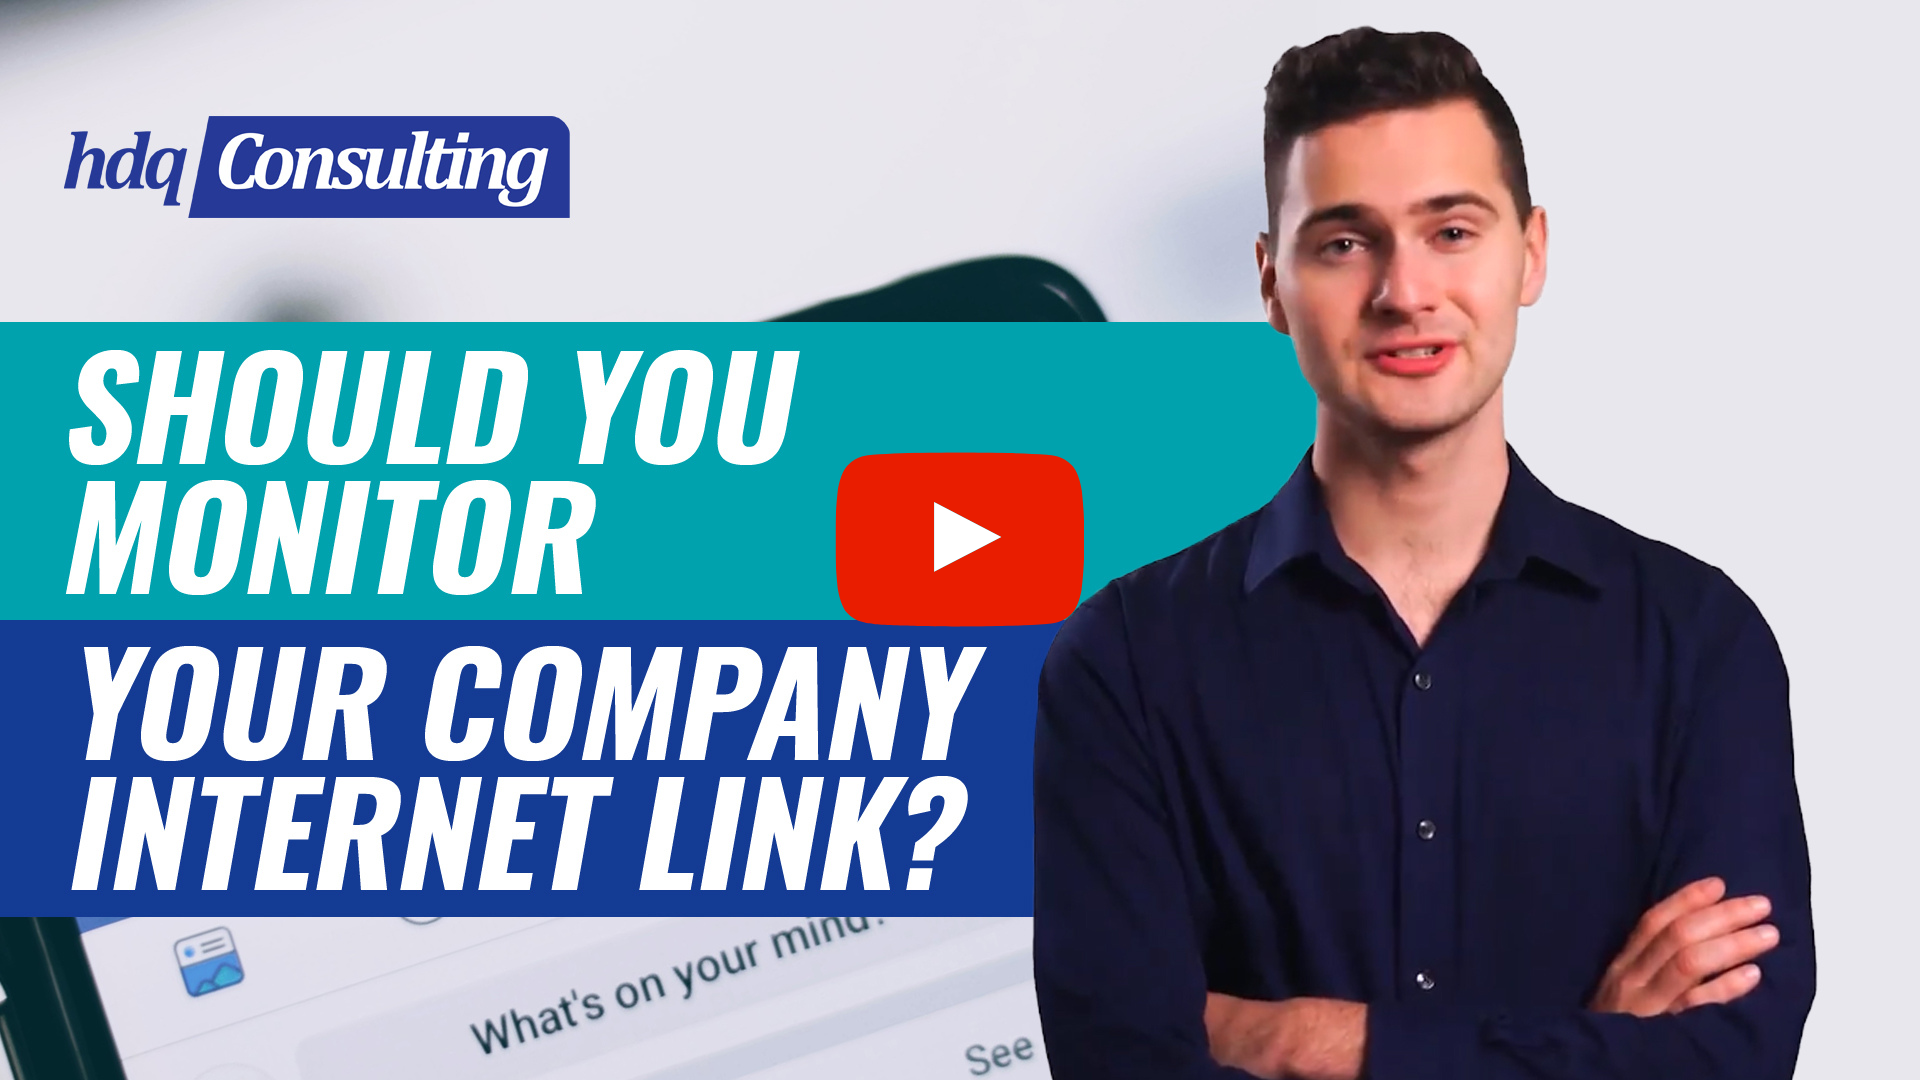 Should you monitor your company internet link?